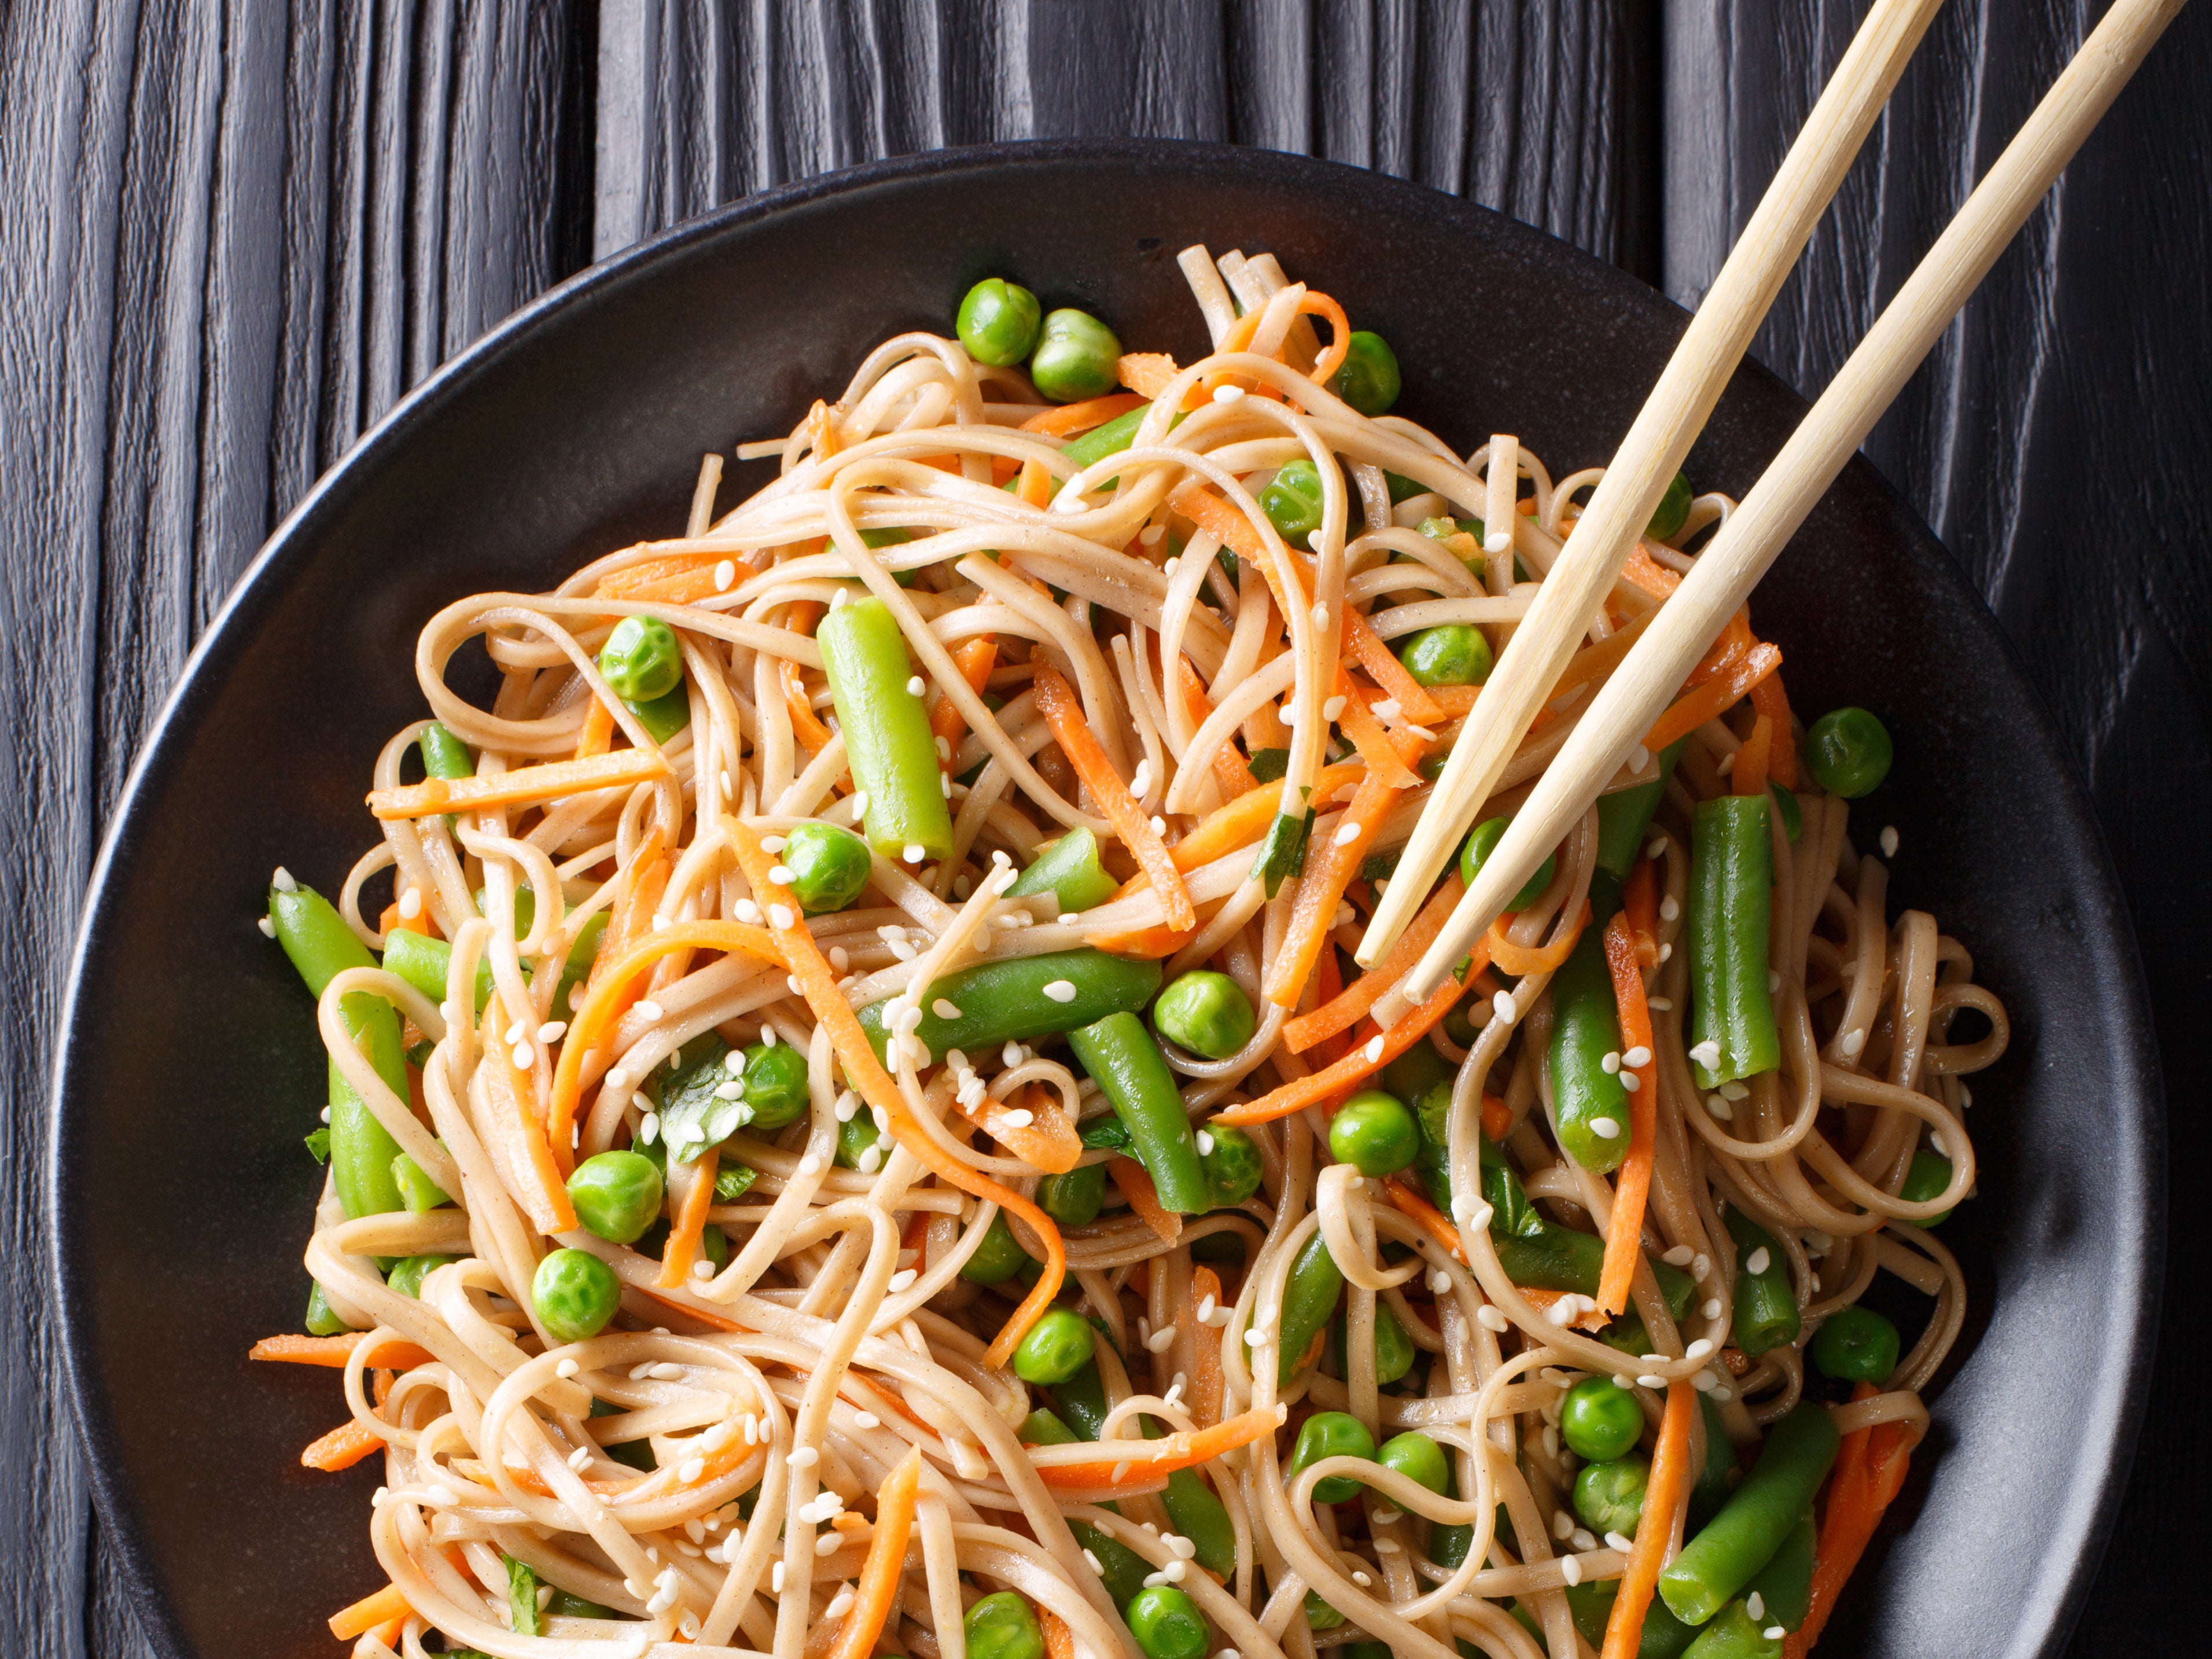 Soba, Japanese buckwheat noodles, are ideal for salads